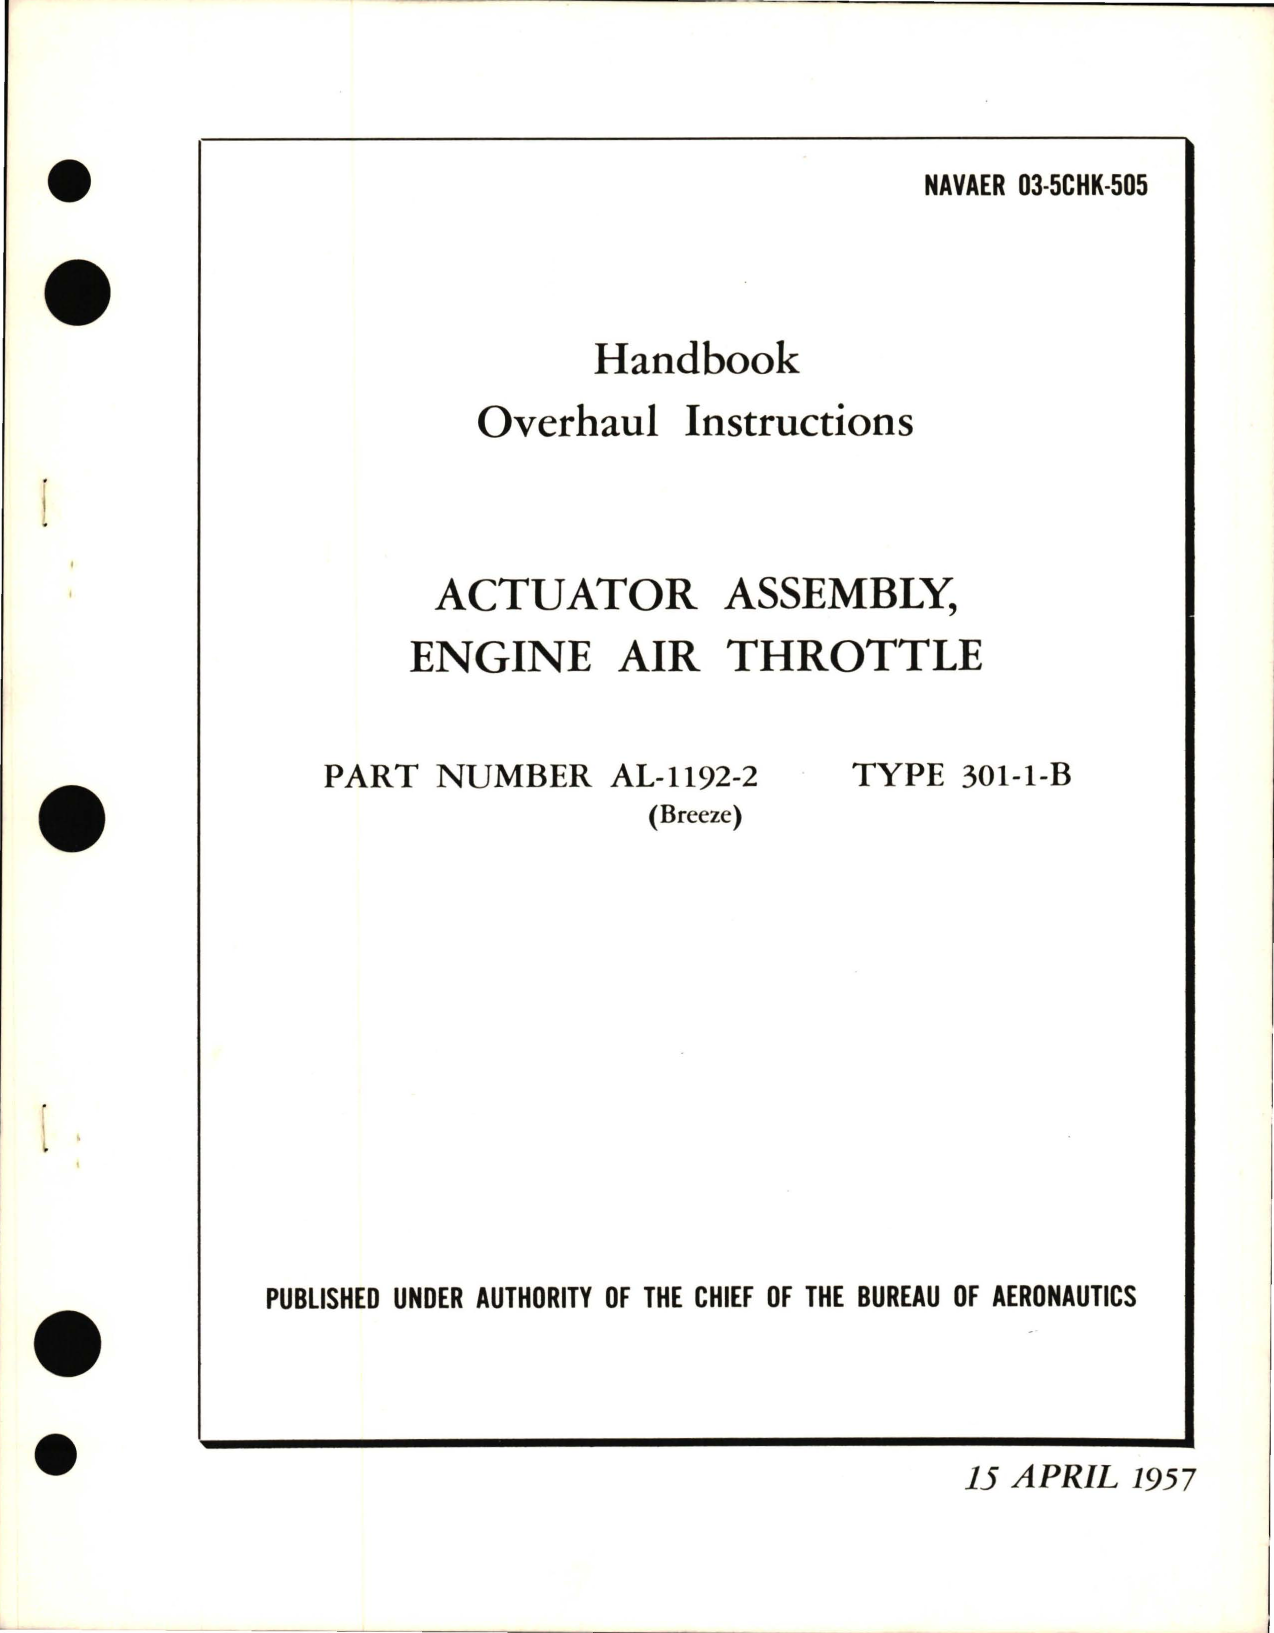 Sample page 1 from AirCorps Library document: Overhaul Instructions for Actuator Assembly Engine Air Throttle, Part No. AL-1192-2, Type 301-1-B